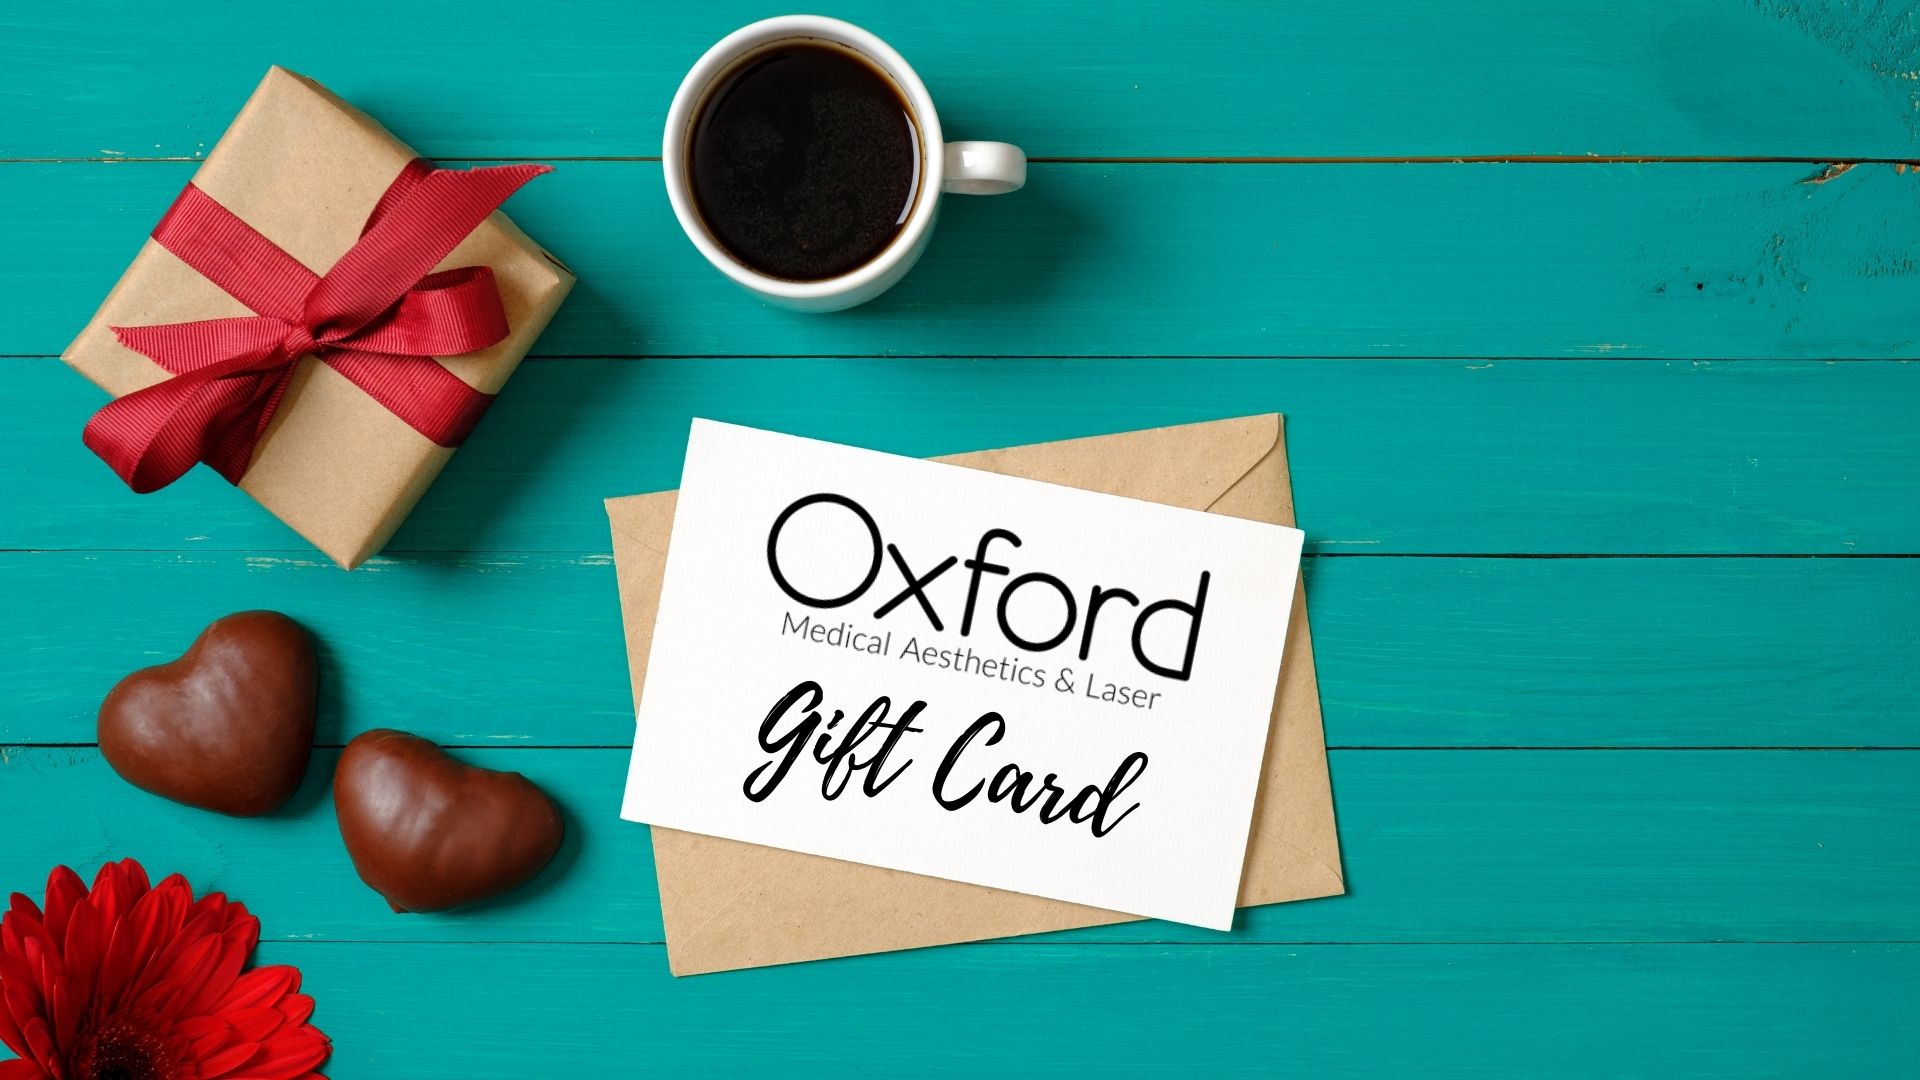 Oxford Medical Aesthetics Gift Card Oxford Medical